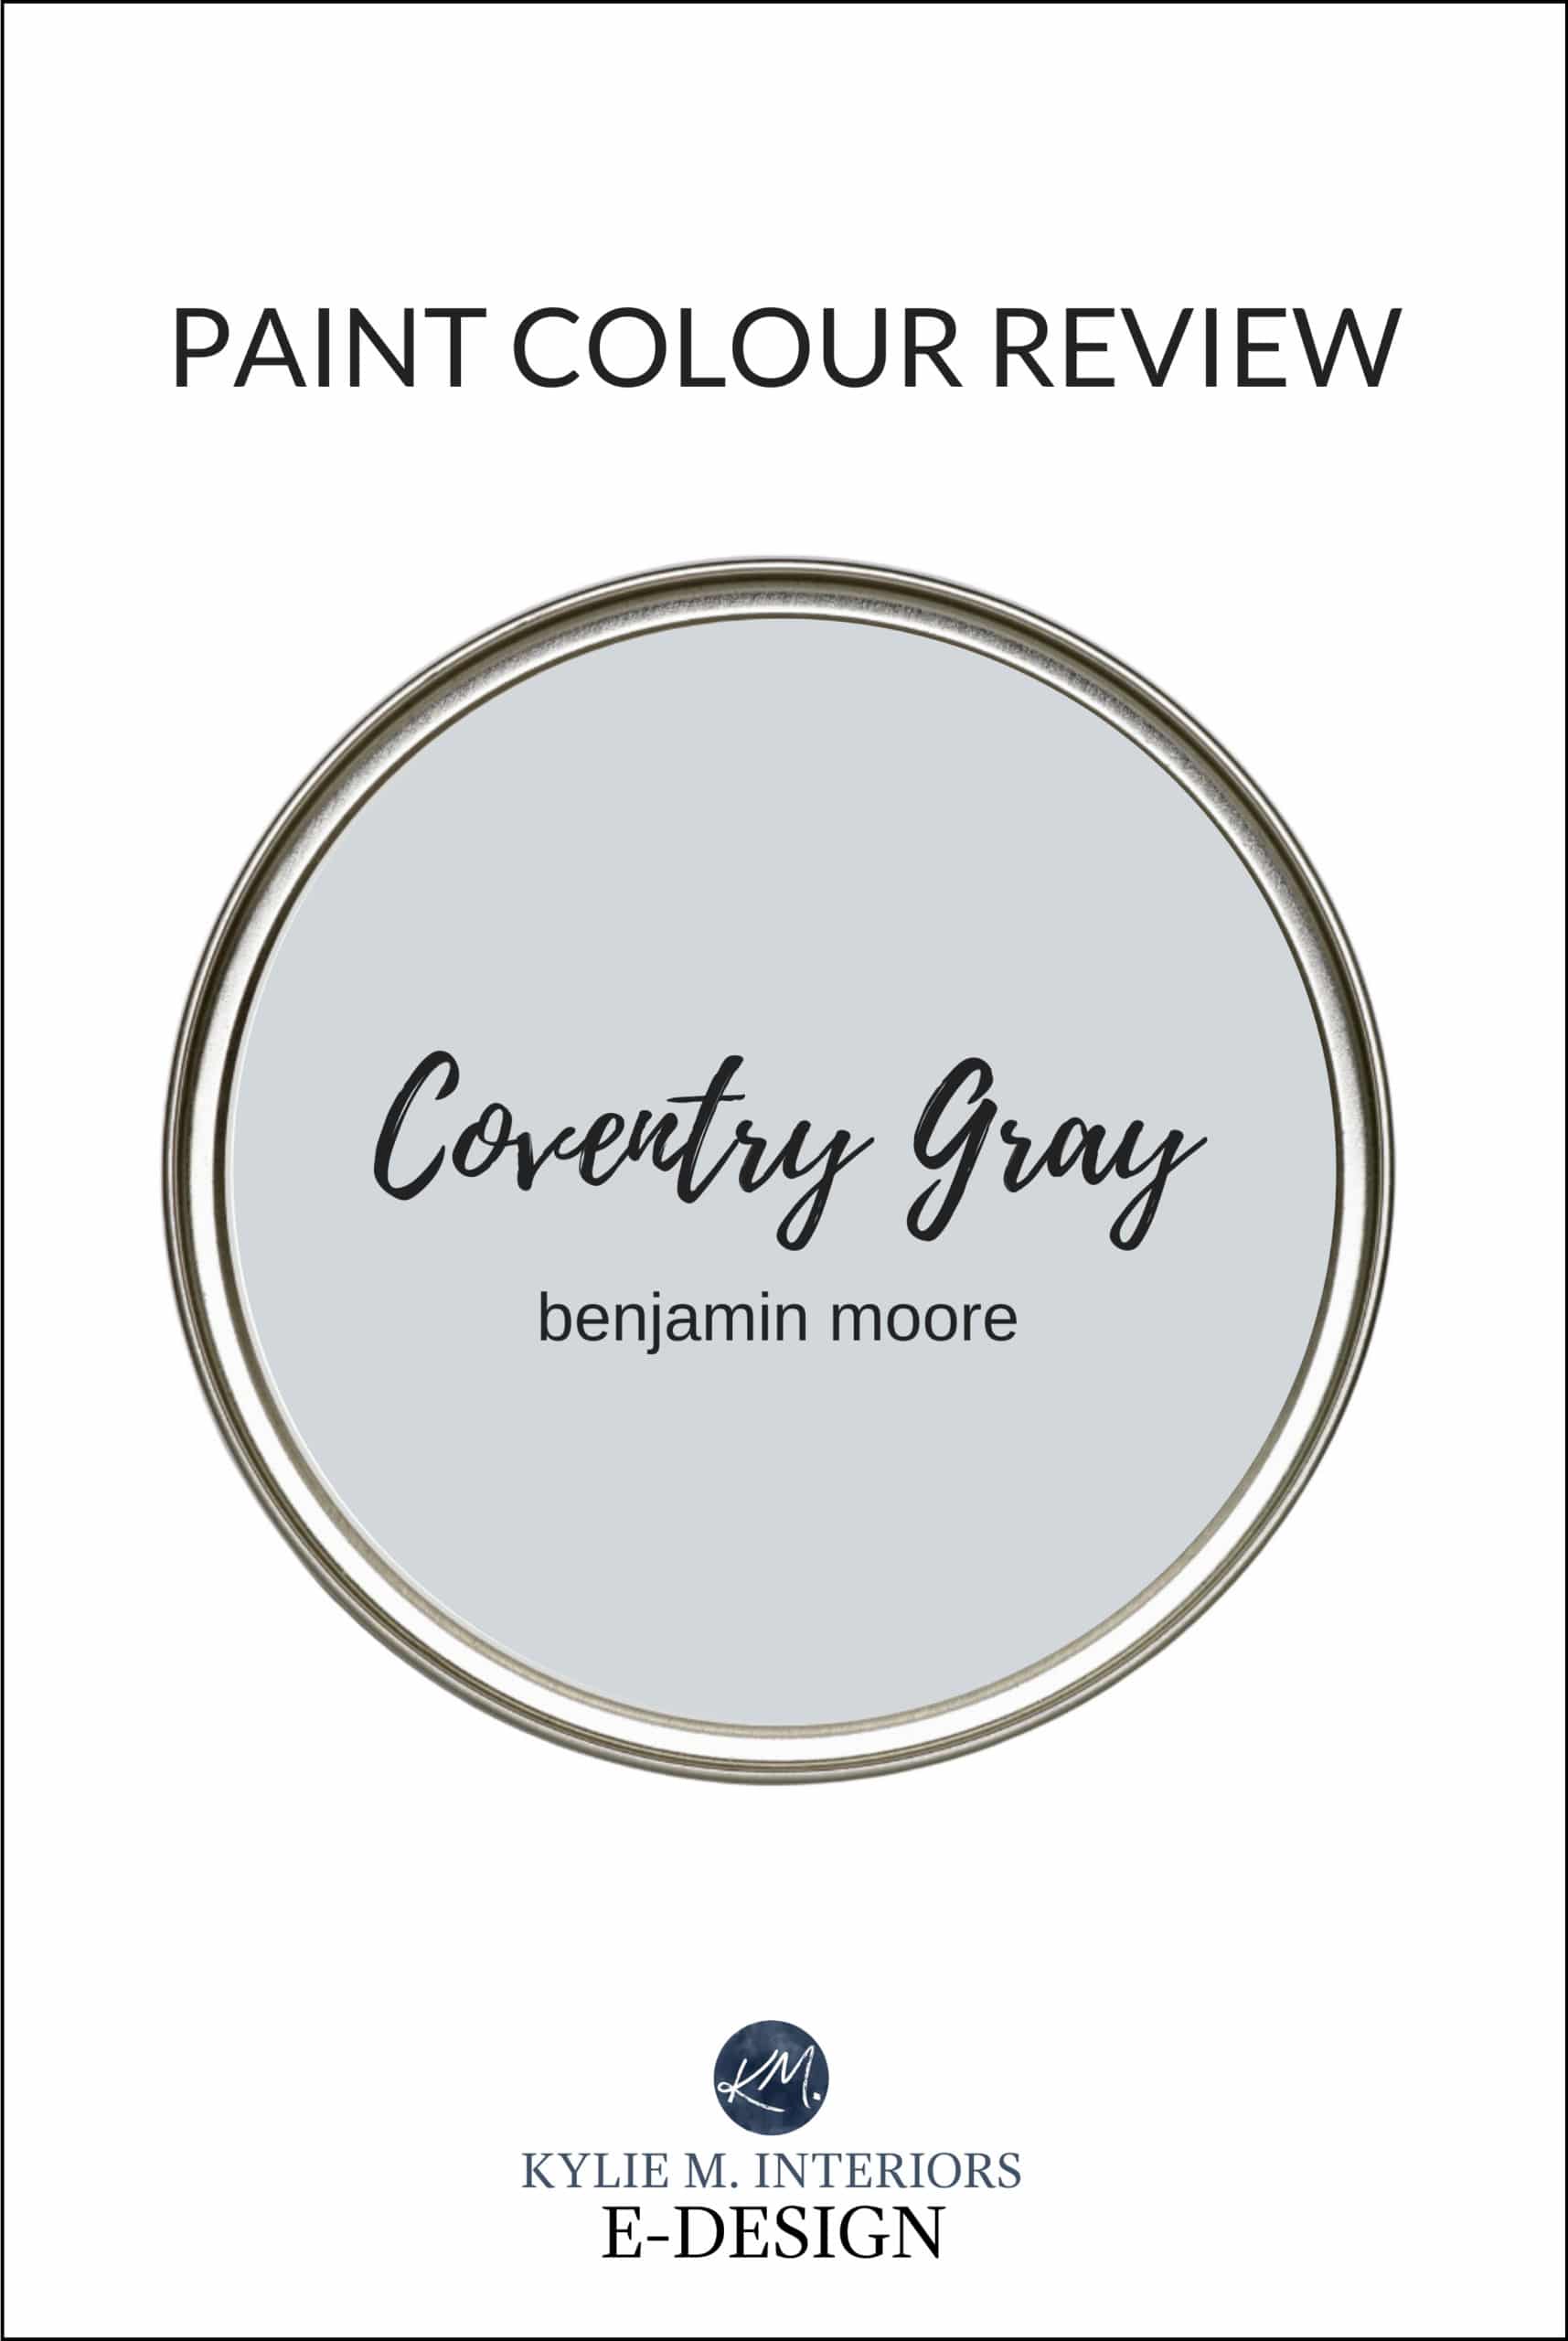 Best gray paint colour review, Benjamin Moore Coventry Gray. Top grey. Kylie M Interiors Edesign, online paint colour and diy decorating advice